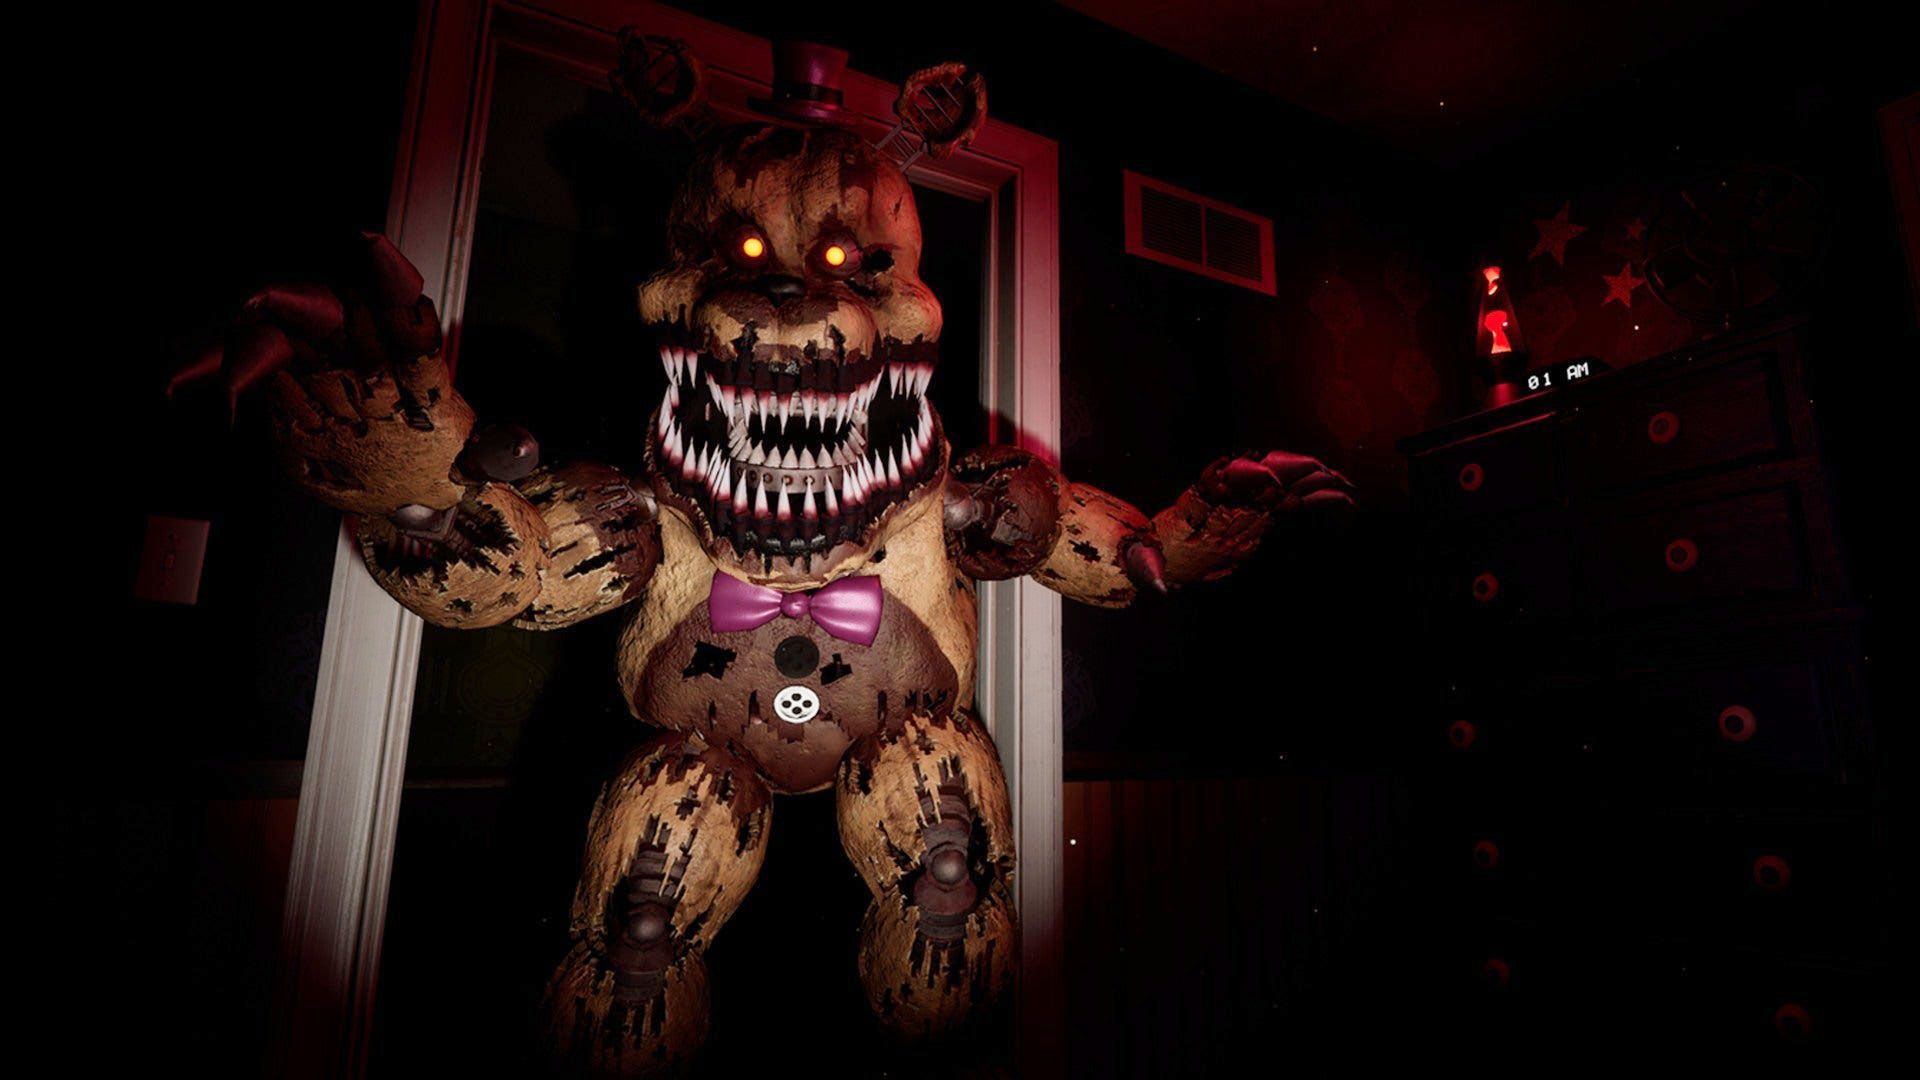 We are officially 10 weeks away from the release of Five Nights at